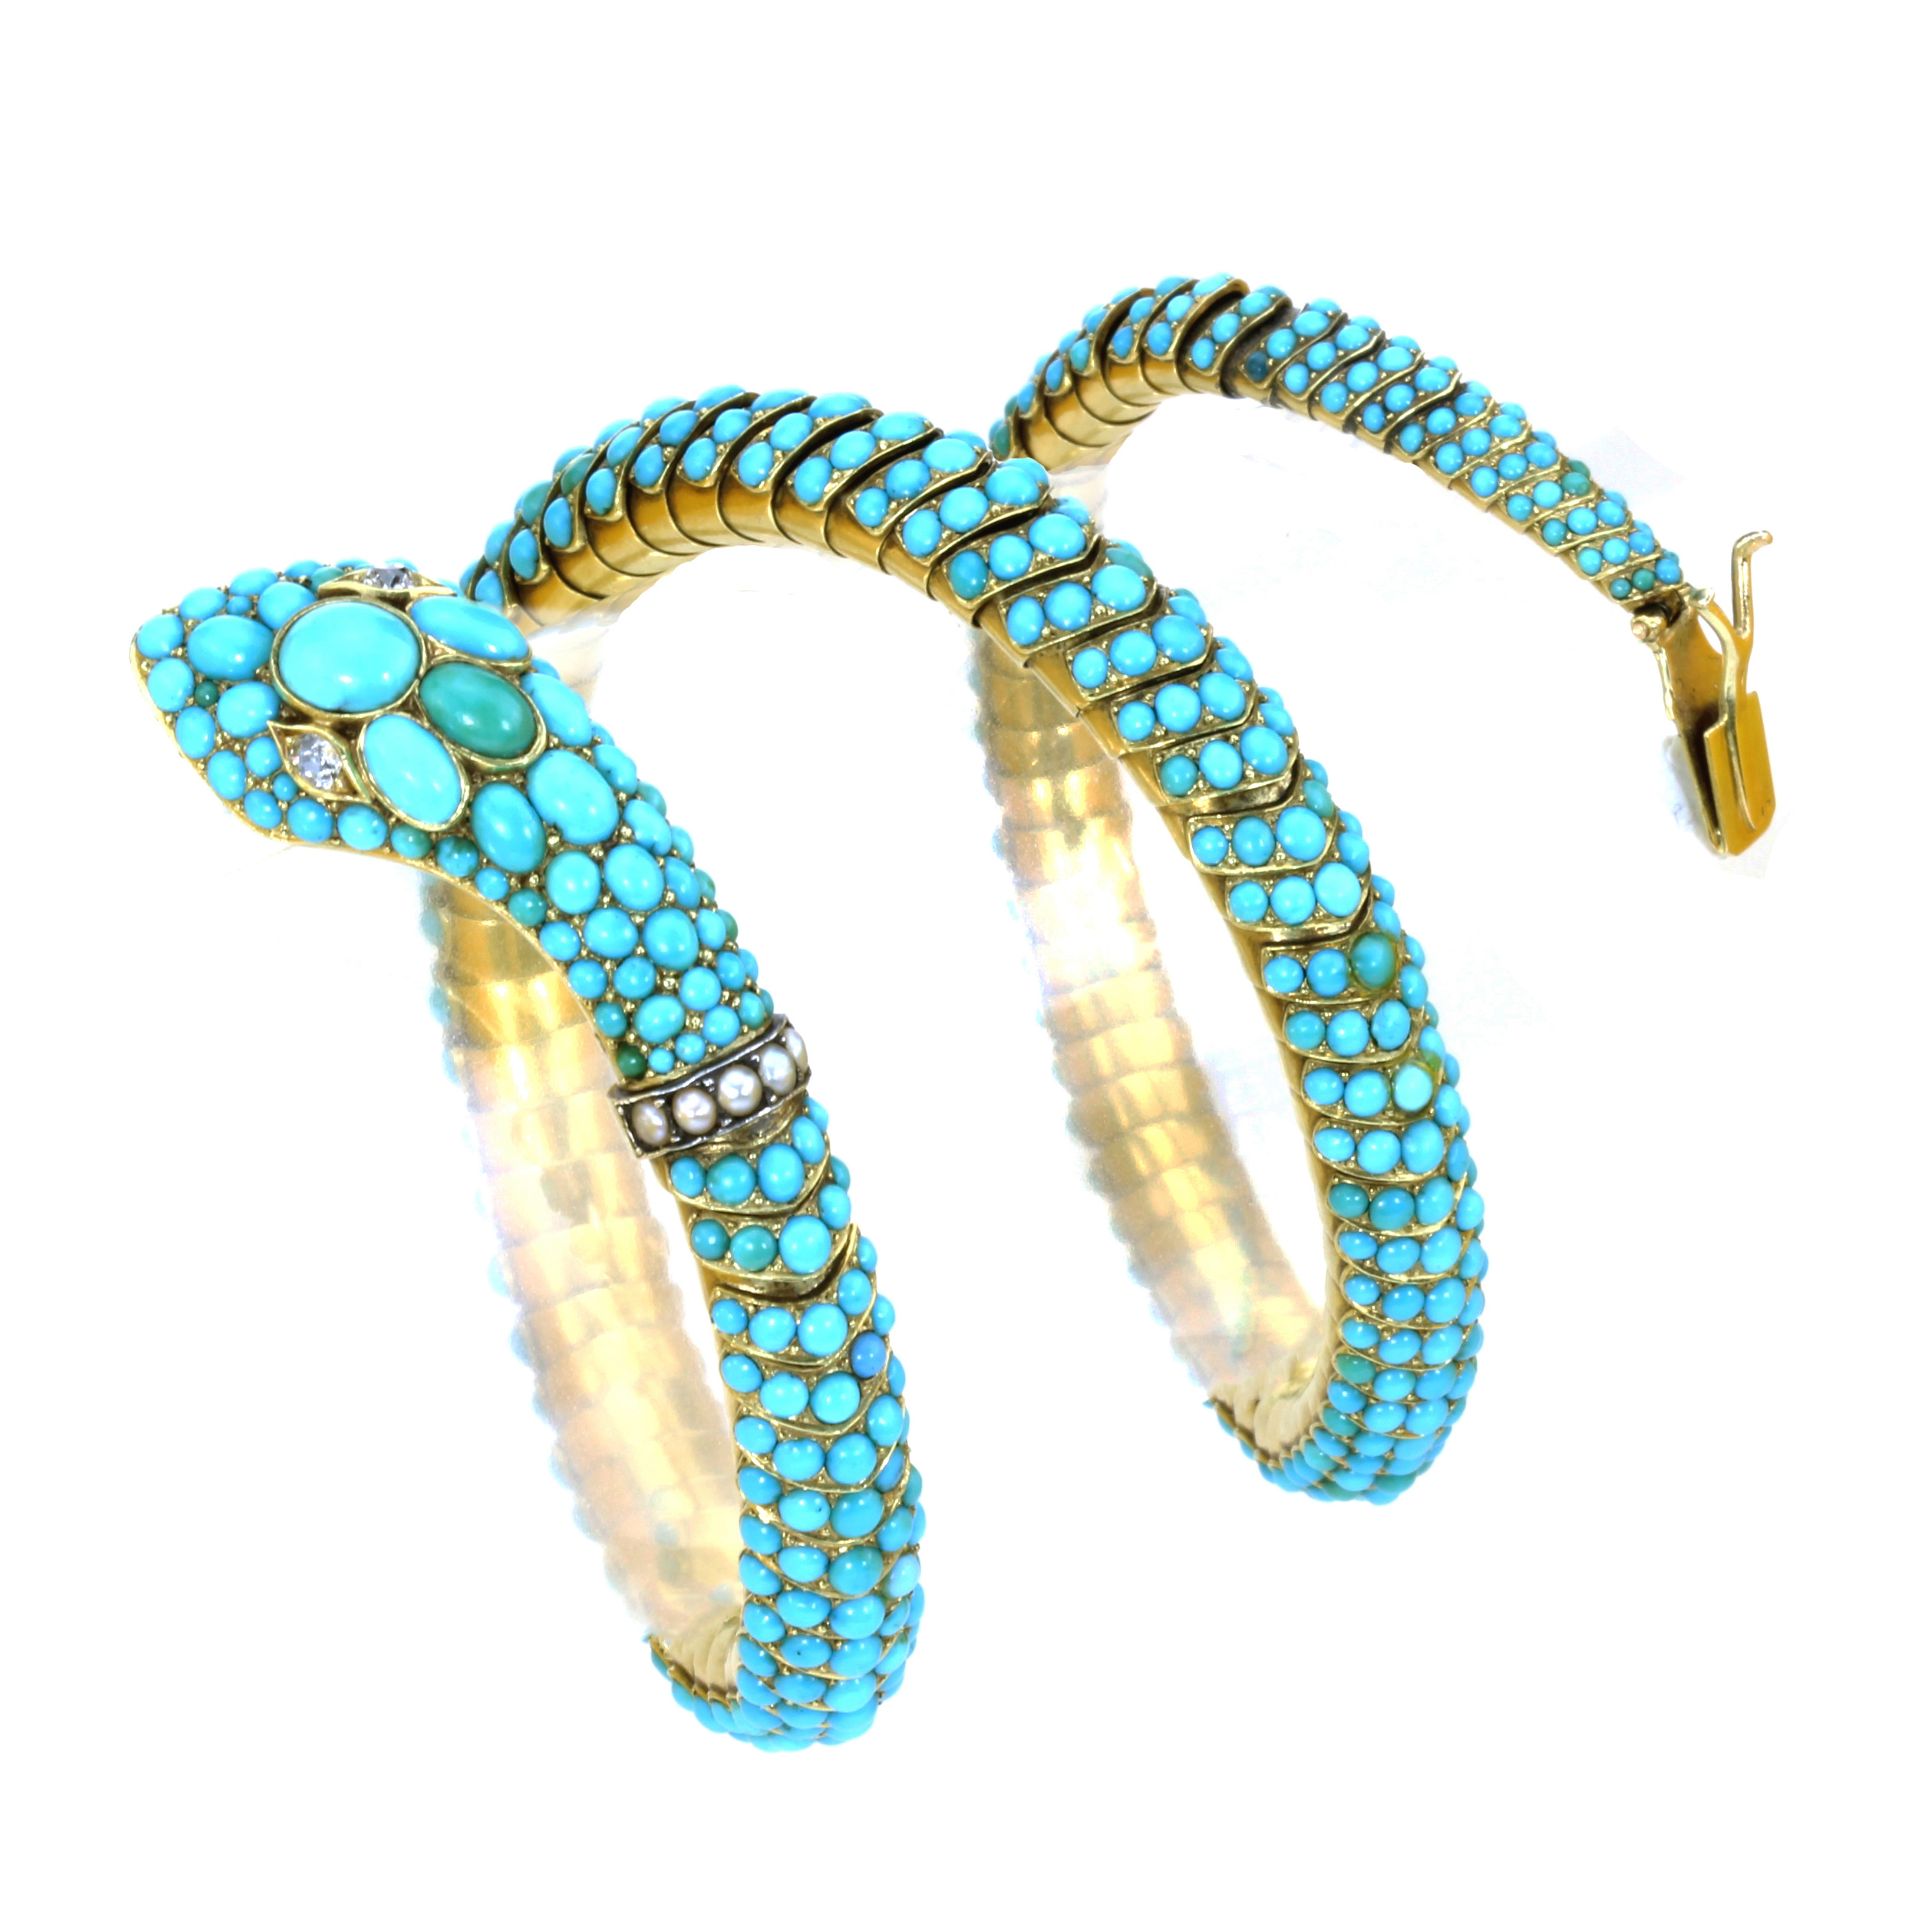 AN ANTIQUE TURQUOISE, PEARL AND DIAMOND SNAKE NECKLACE / BRACELET, 19TH CENTURY in high carat gold